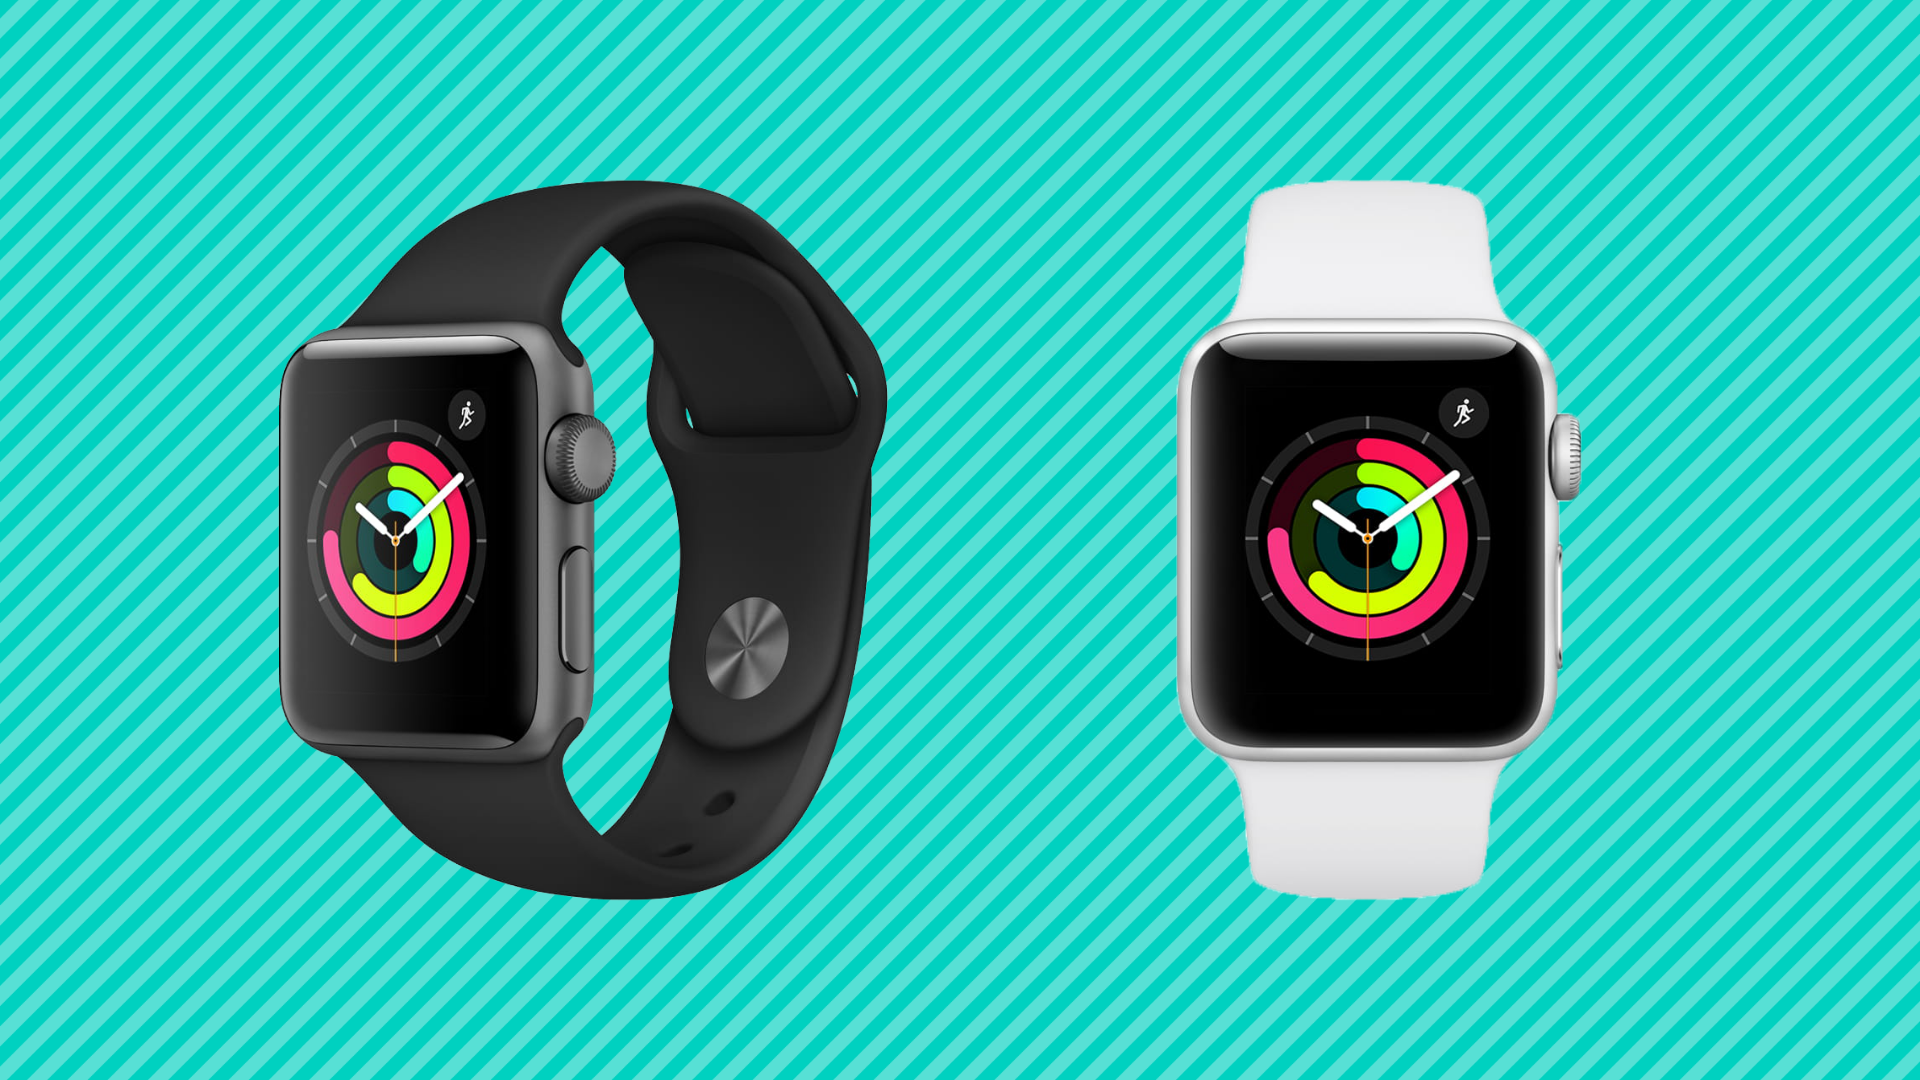 Save $10 On The Apple Watch Series 3 - Size Of 38mm Apple Watch Series 3 - HD Wallpaper 